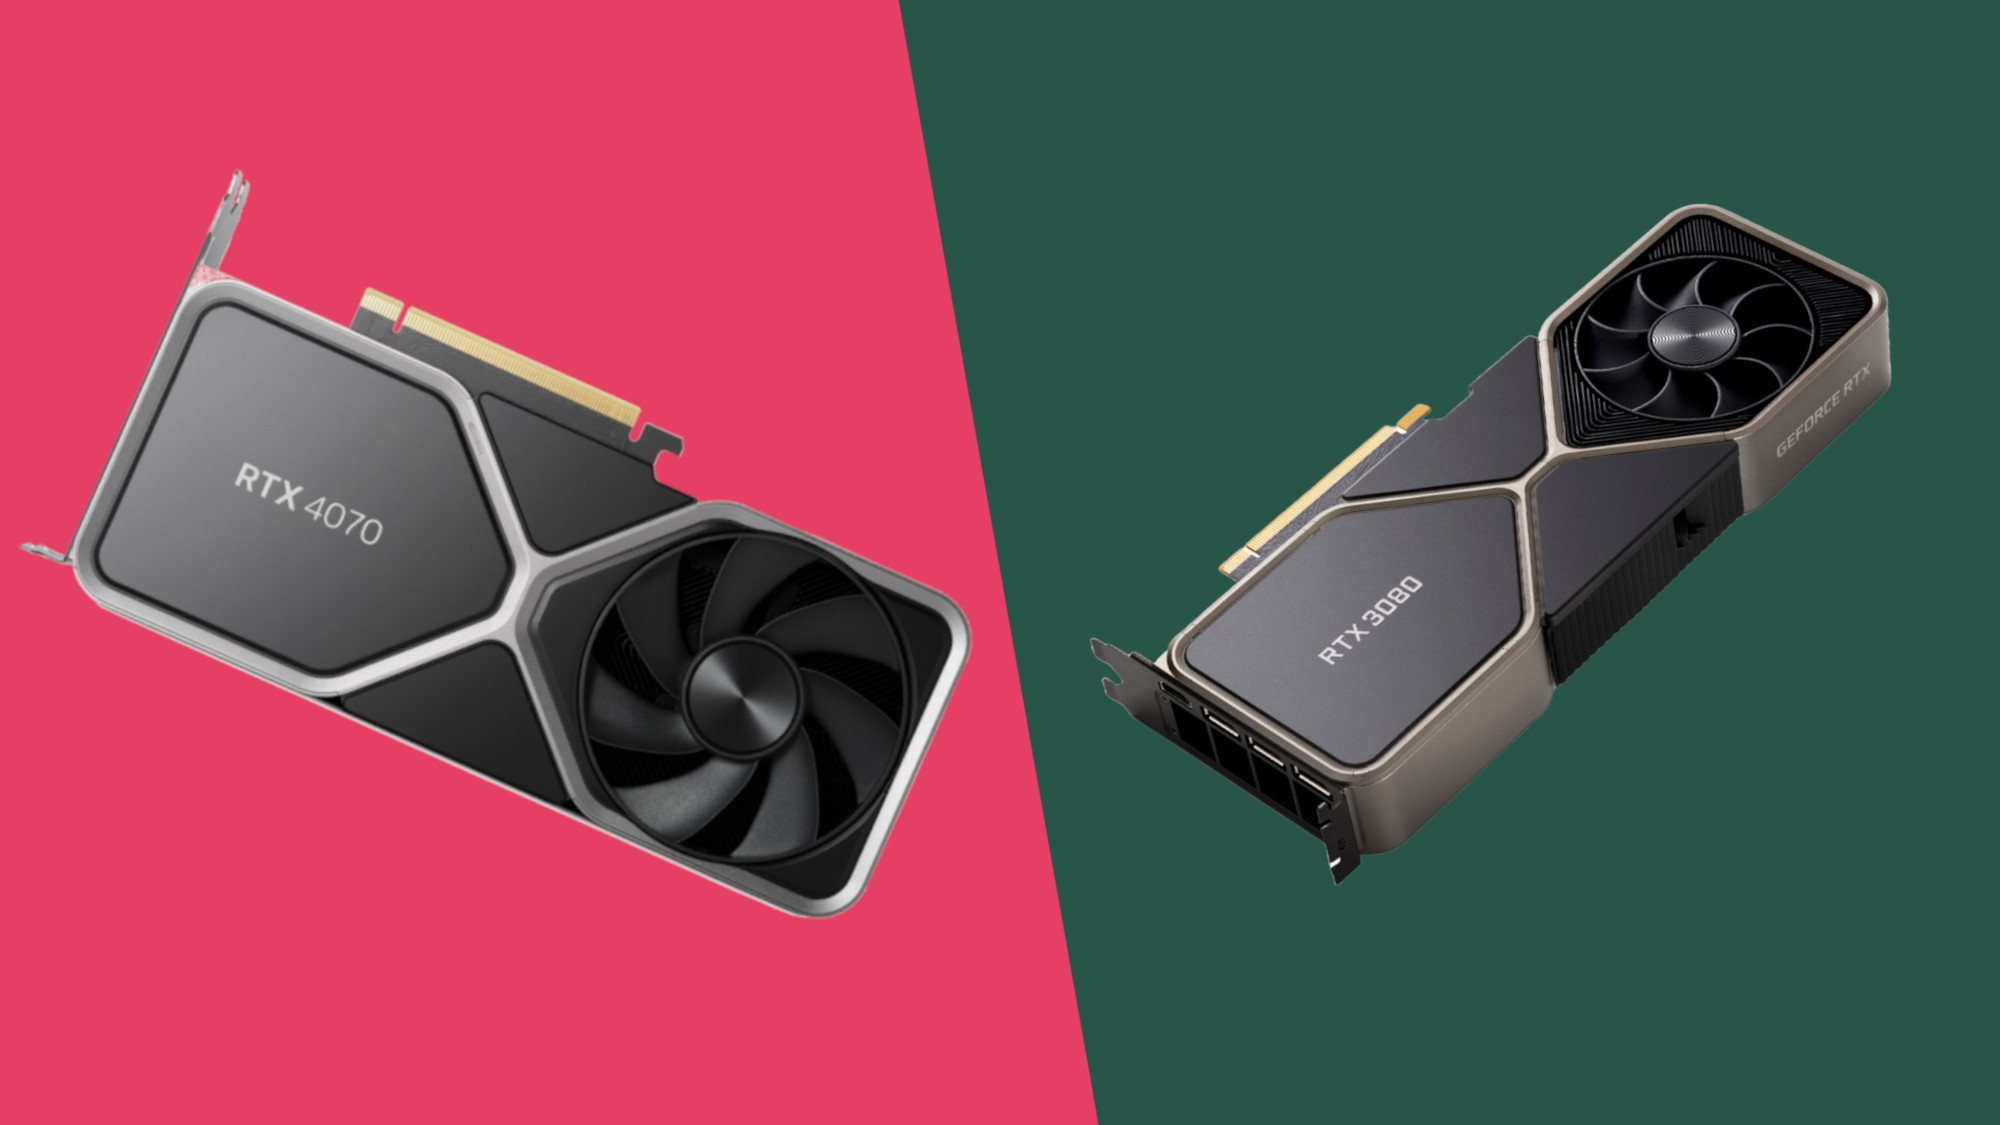 Nvidia RTX 4070 vs 3080: two of the best GPUs around go toe to toe